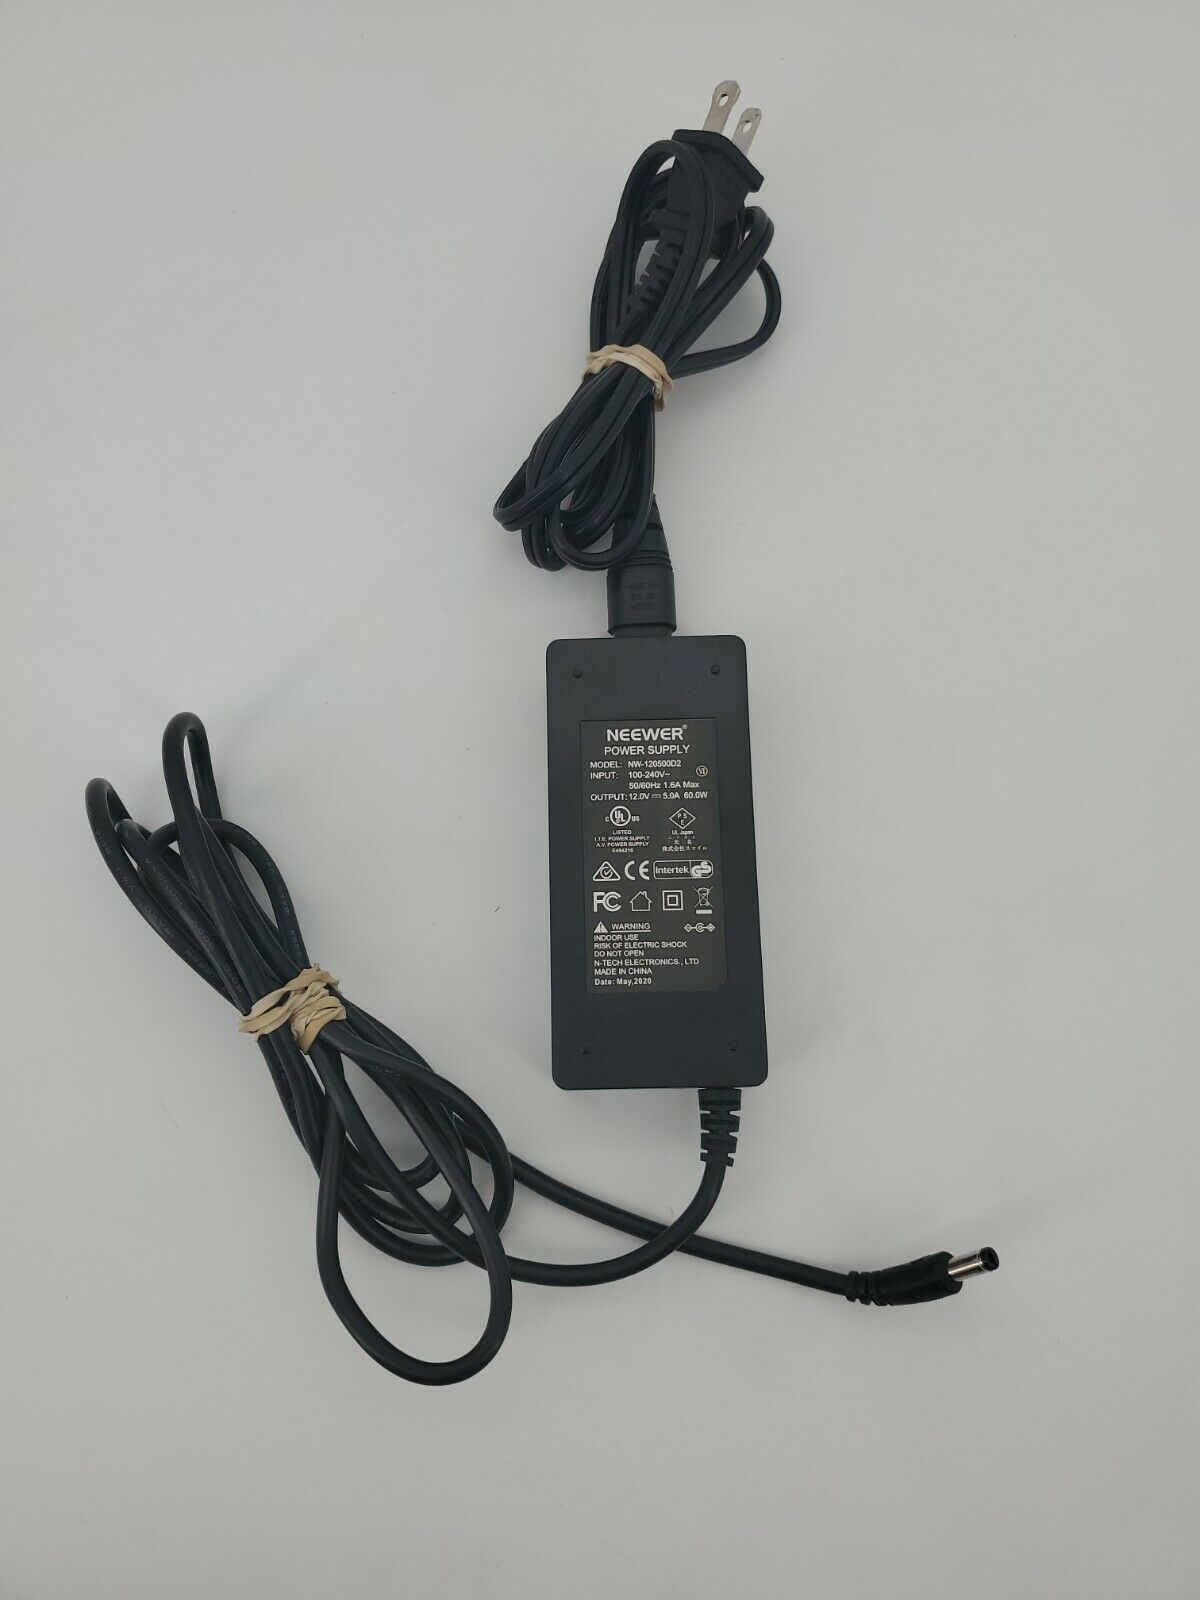 Neewer Power Adapter Model NW-1205500D2 Indoor Use Type: Adapter Features: ne - Click Image to Close